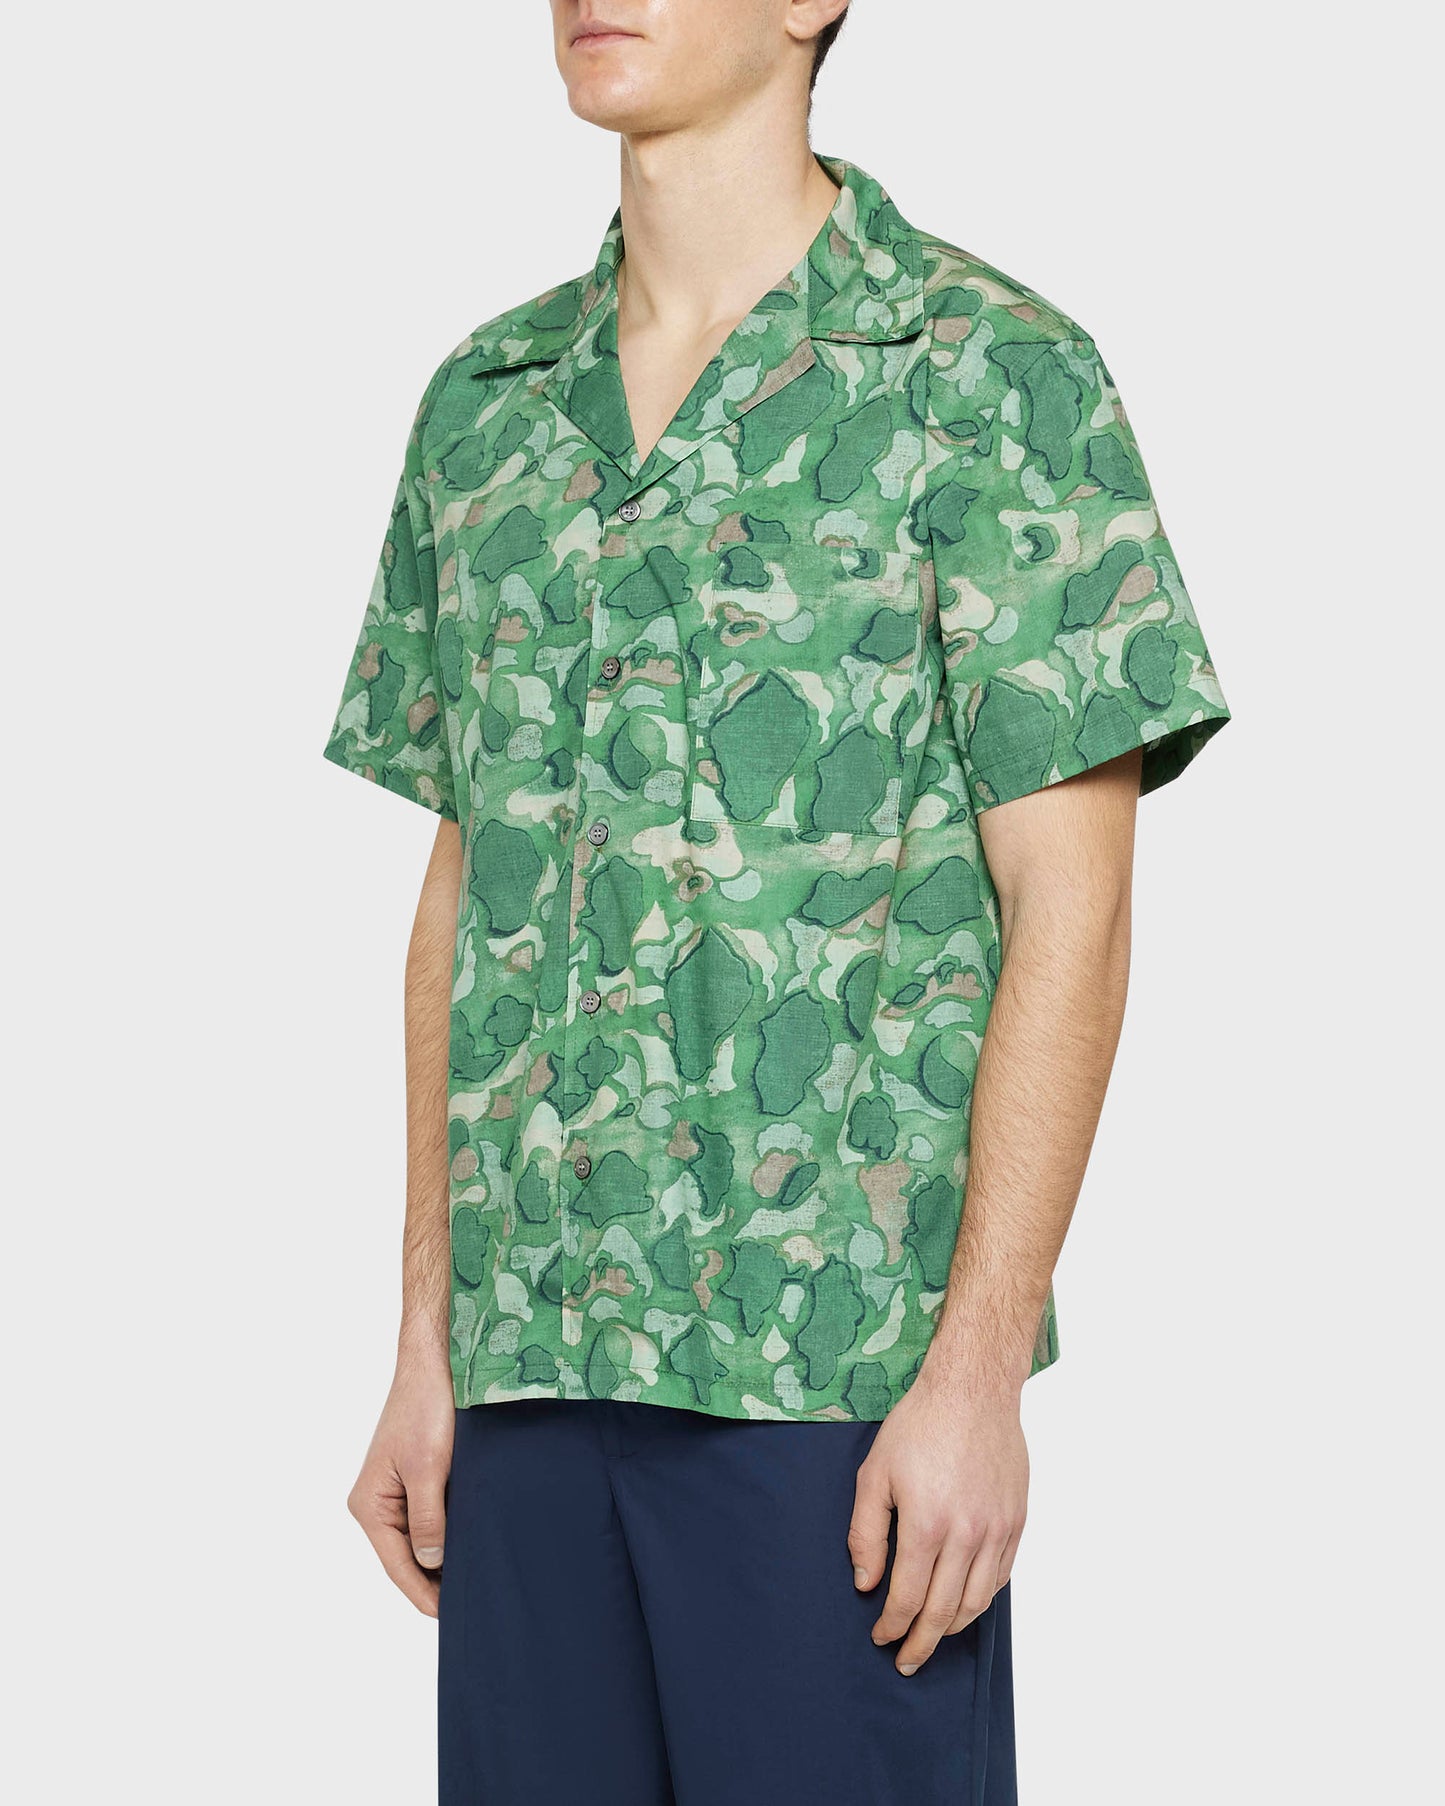 Digital camicia bowling camouflage